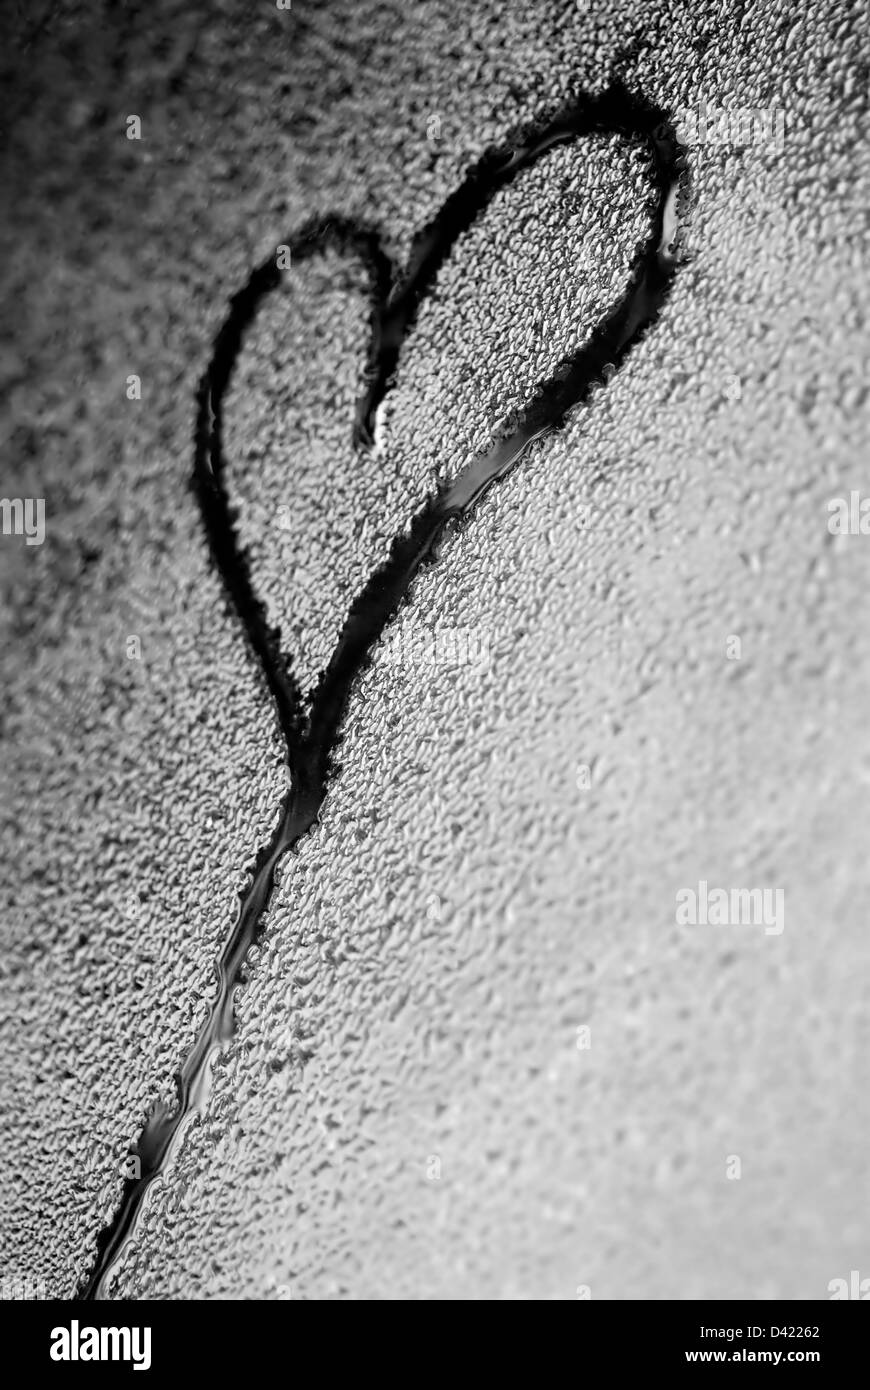 Heart shape in condensation Stock Photo